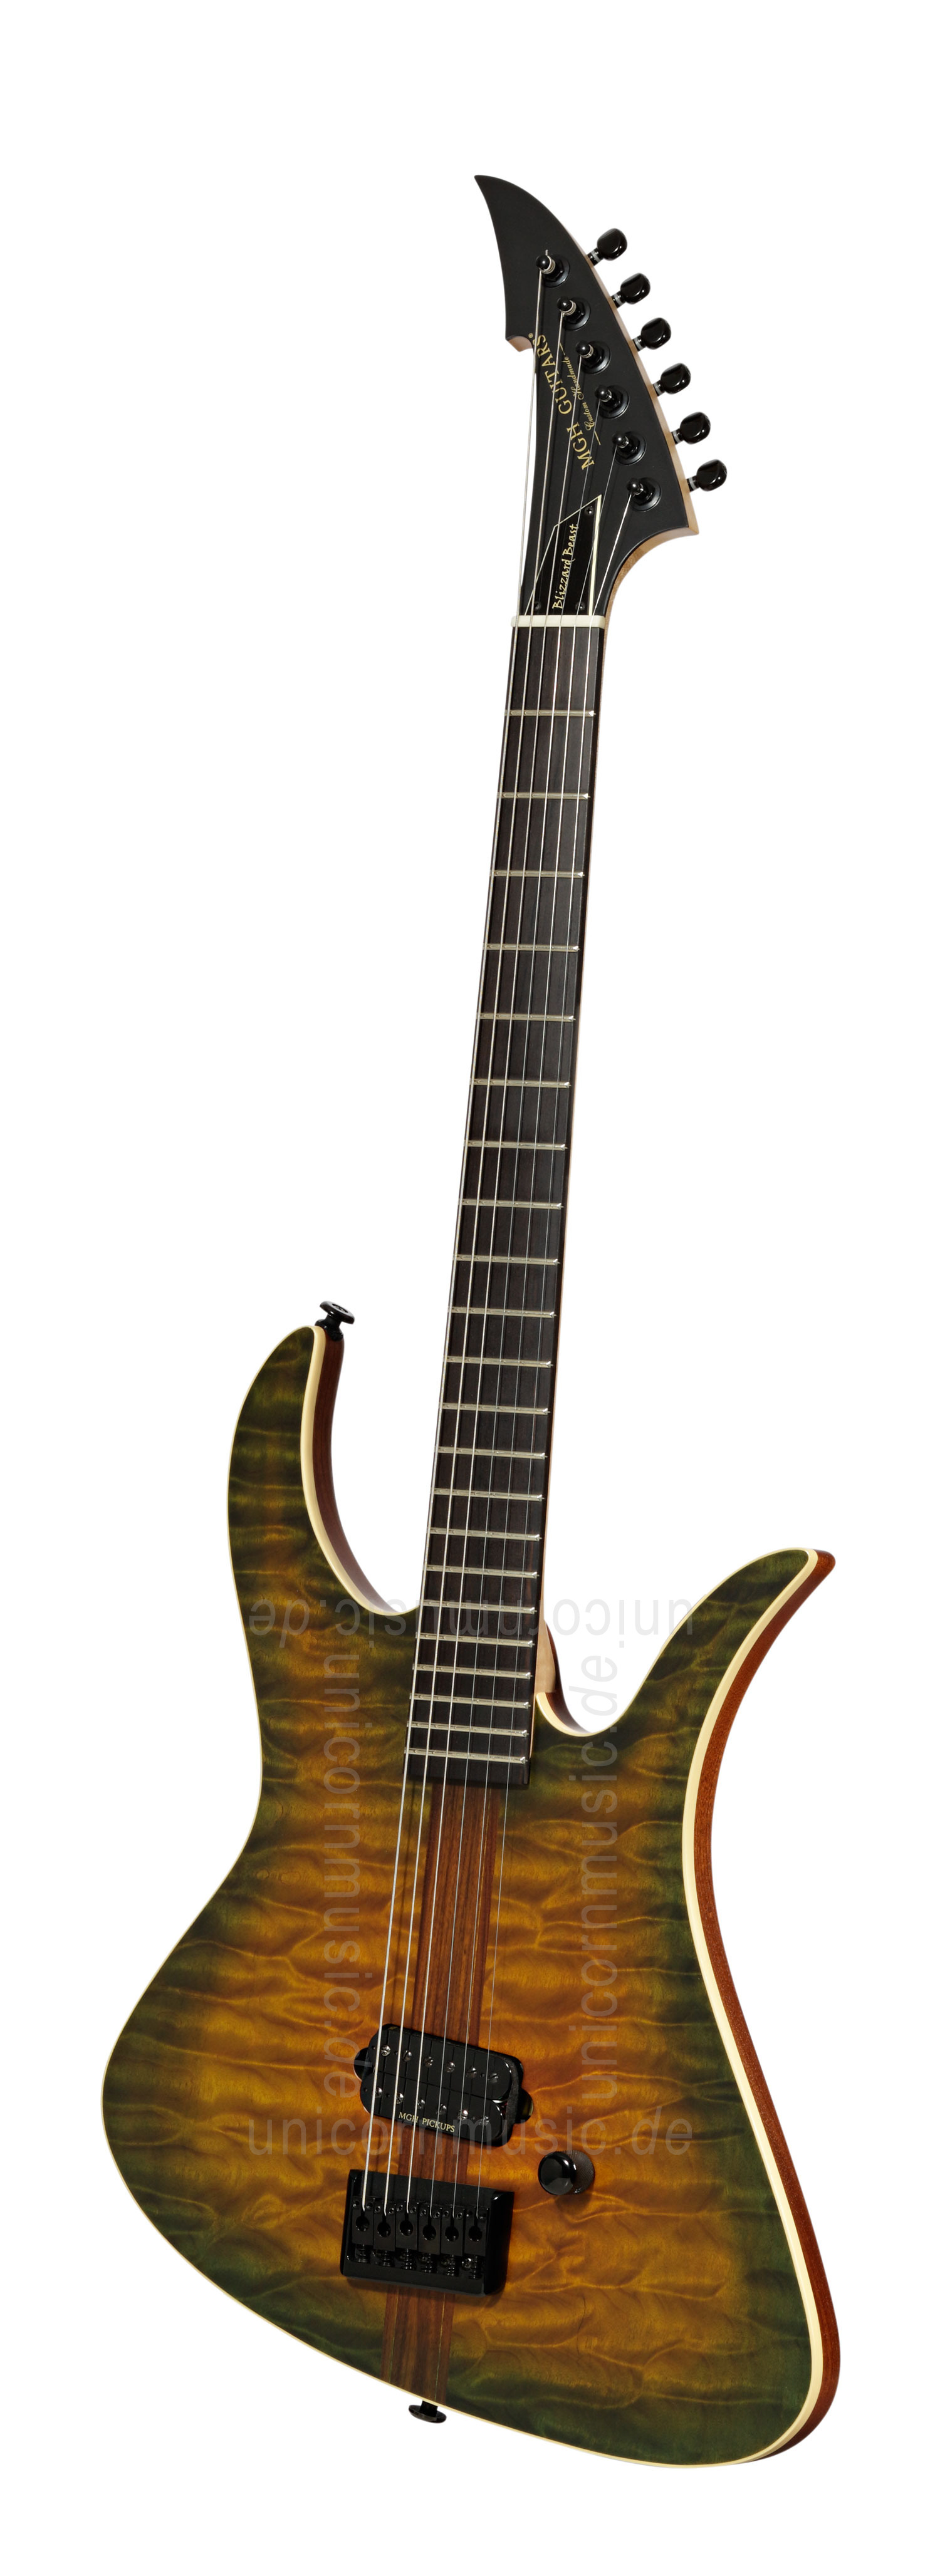 to article description / price Electric MGH GUITARS Blizzard Beast Deluxe - green amber burst  - made in Germany